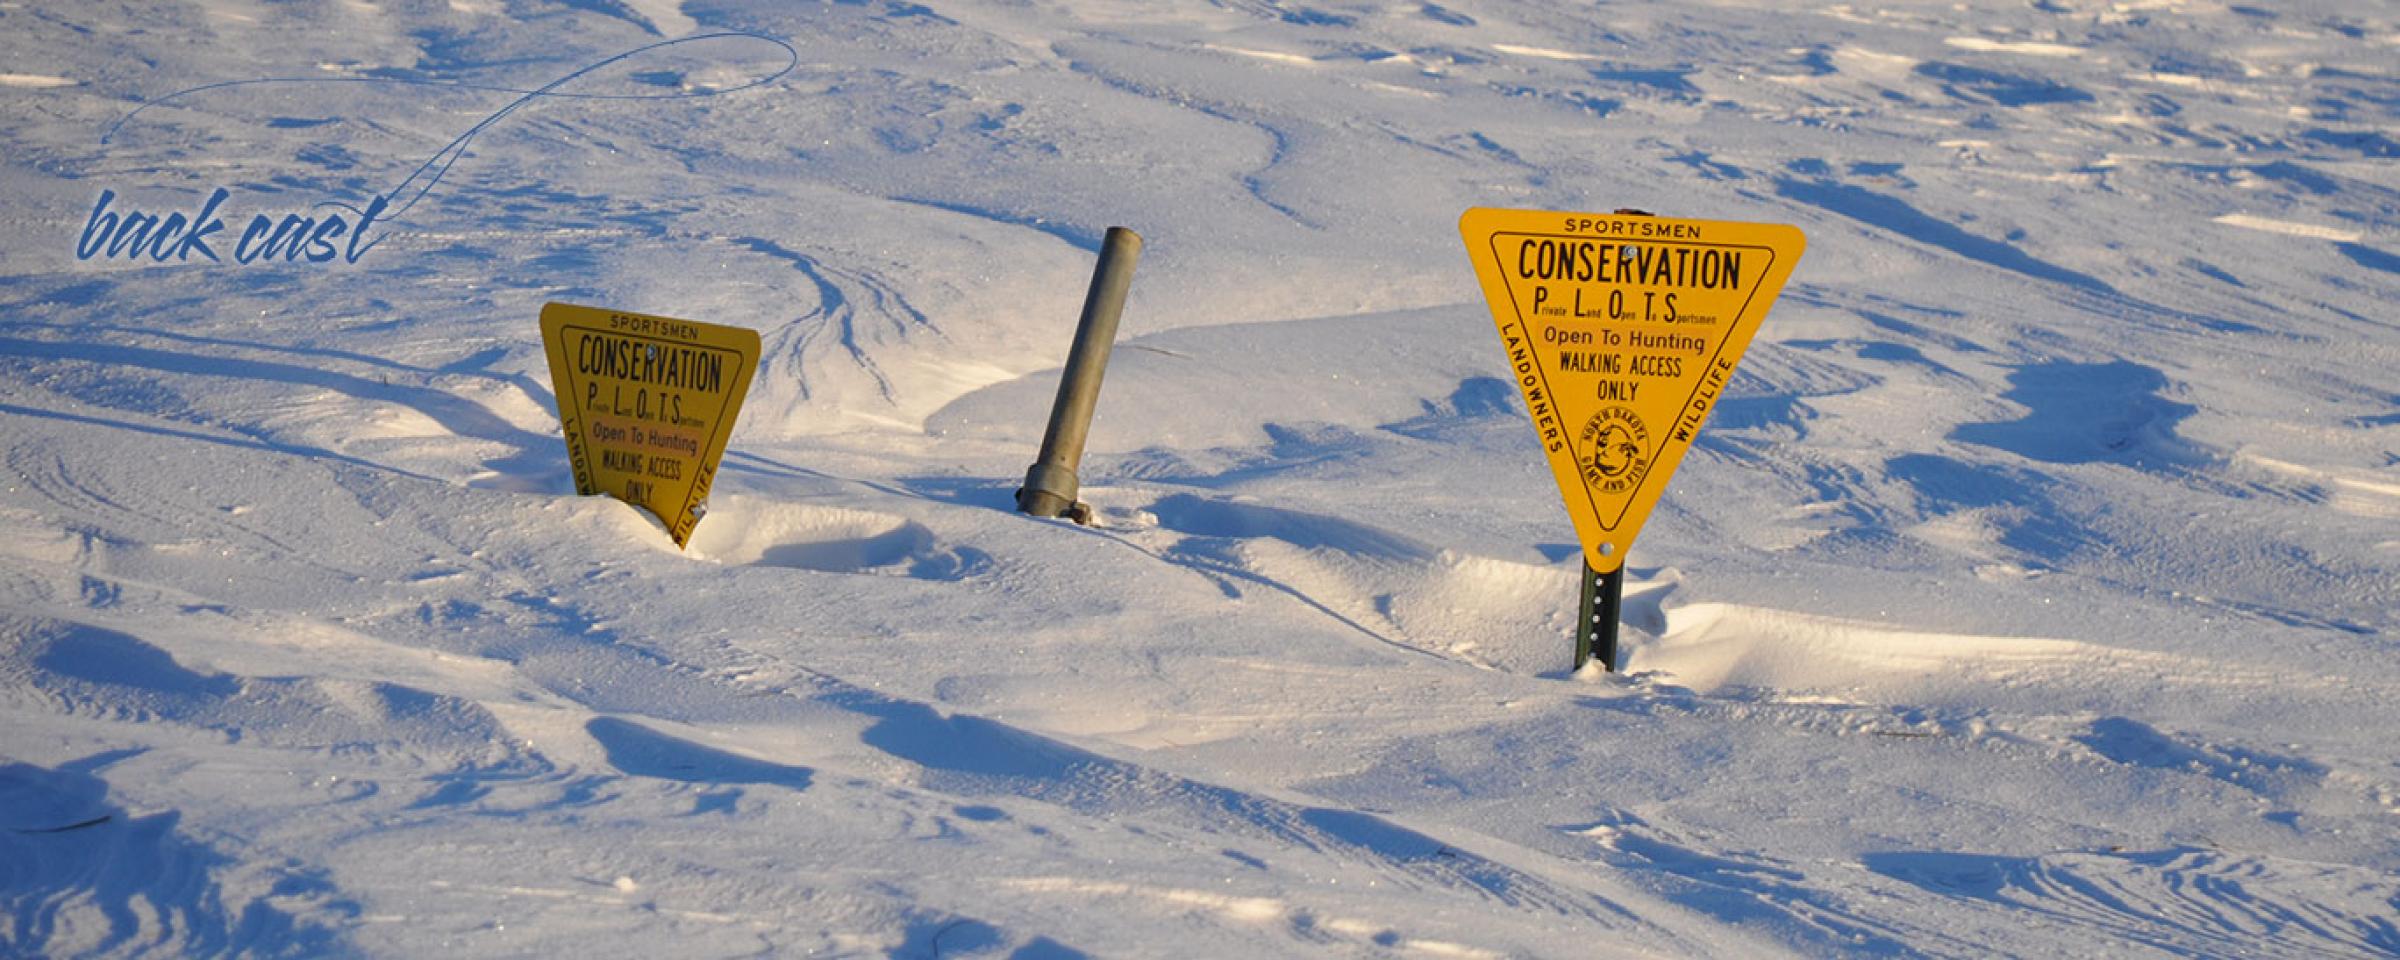 PLOTS signs in a lot of snow